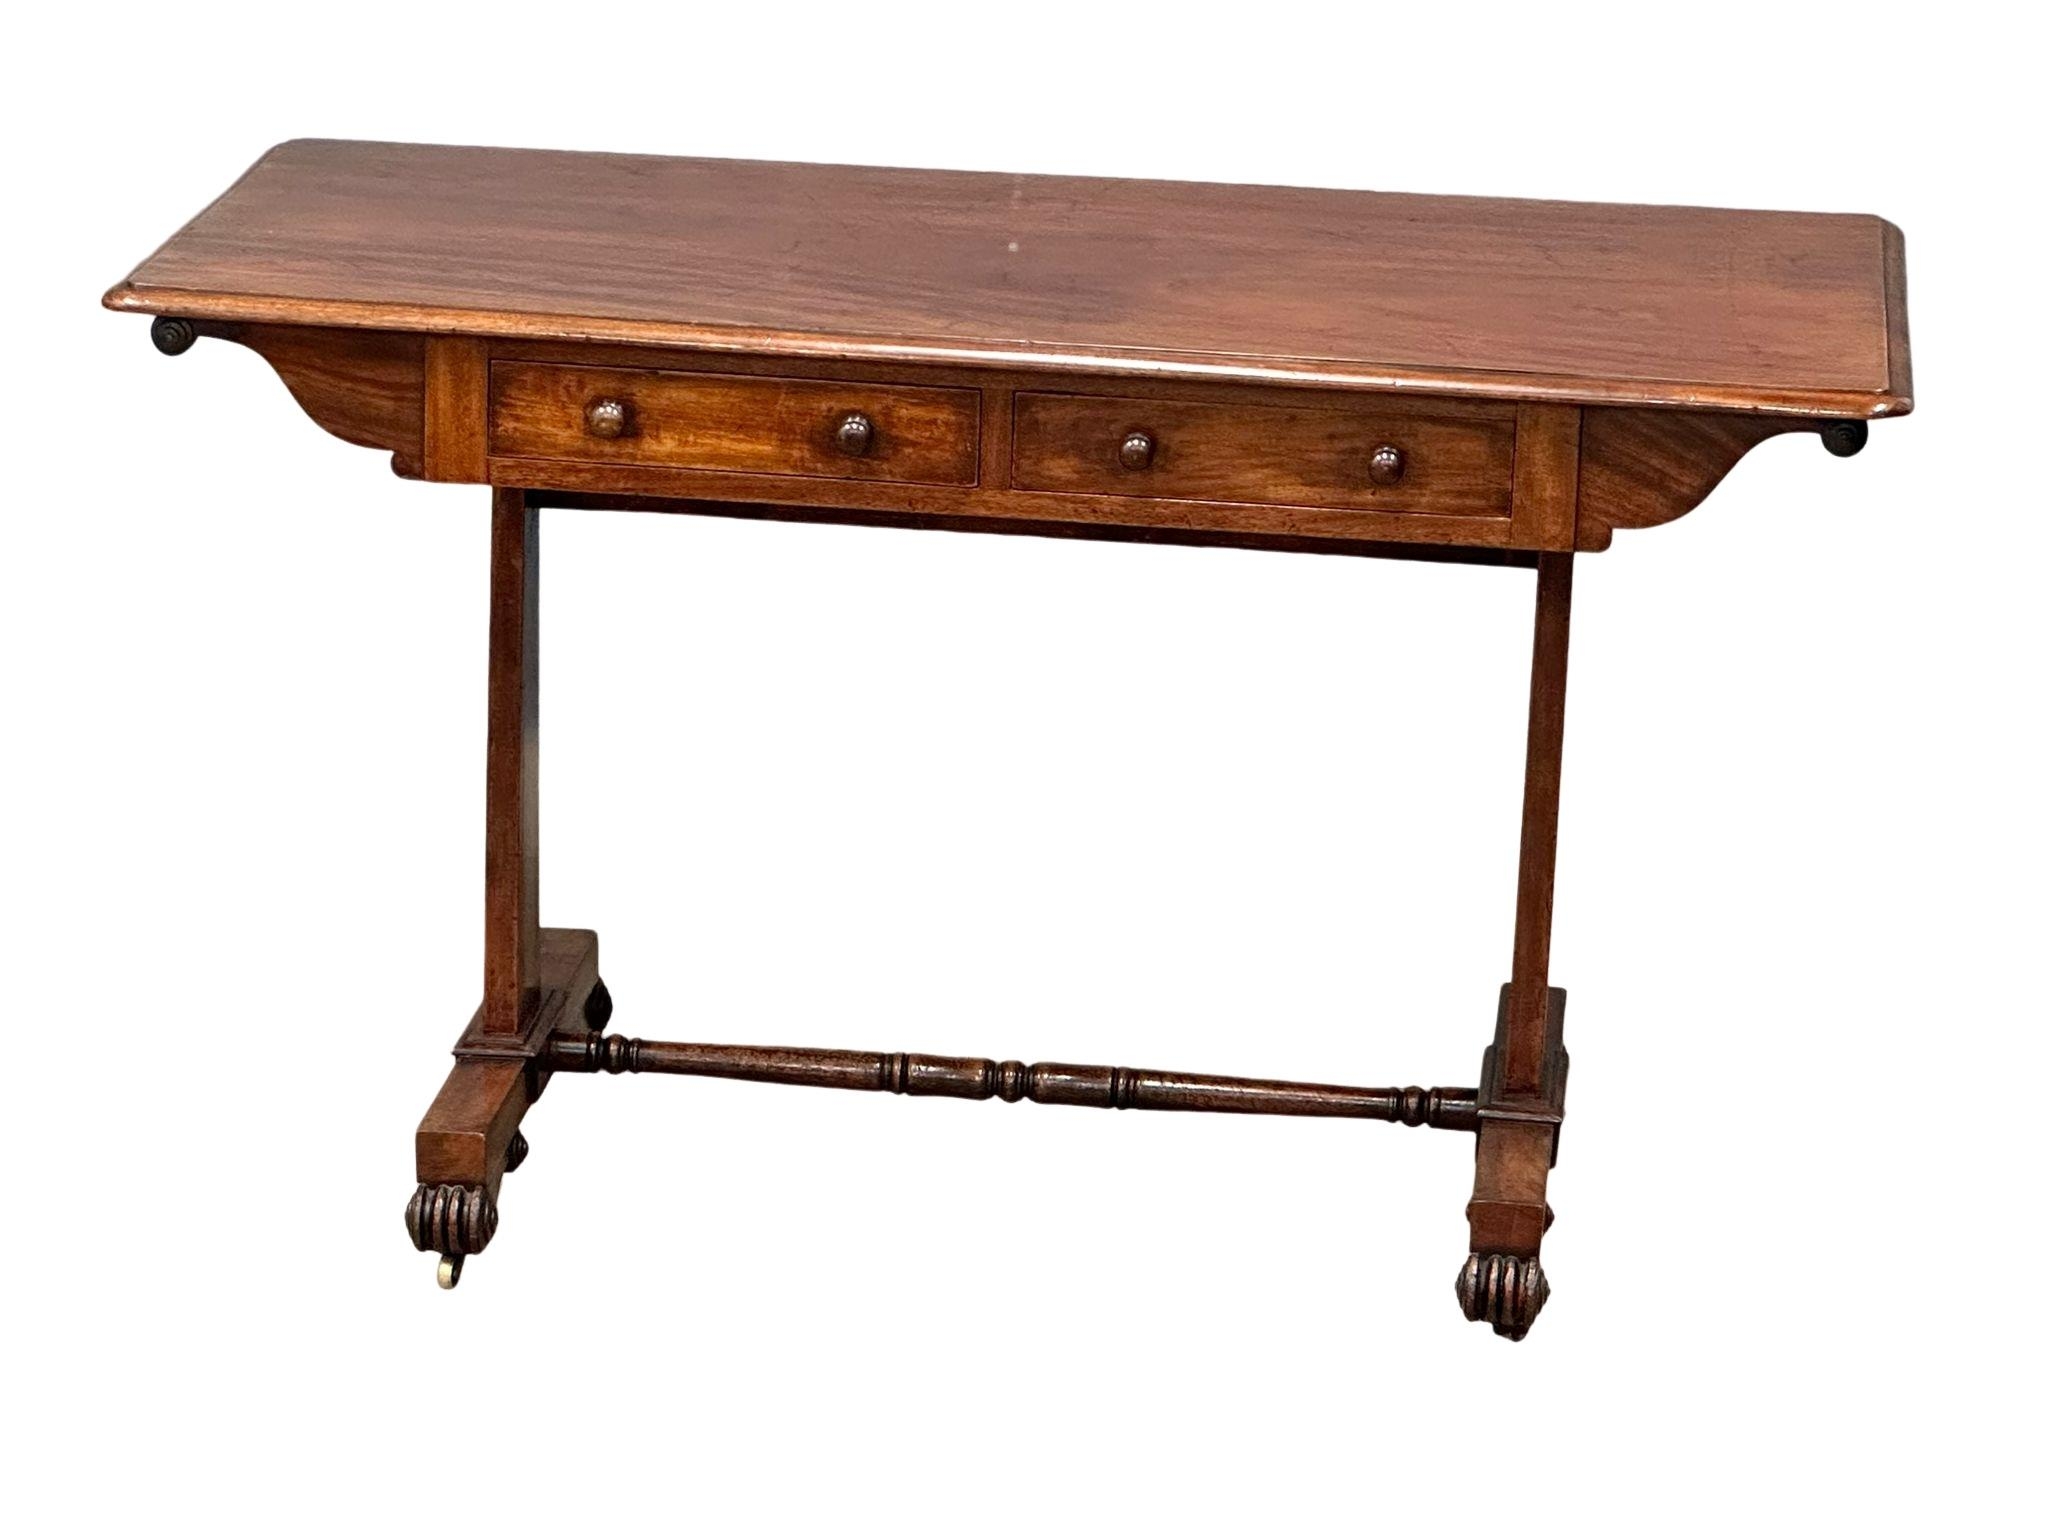 A William IV mahogany double sided library table/sofa table with 2 drawers at front and stretcher